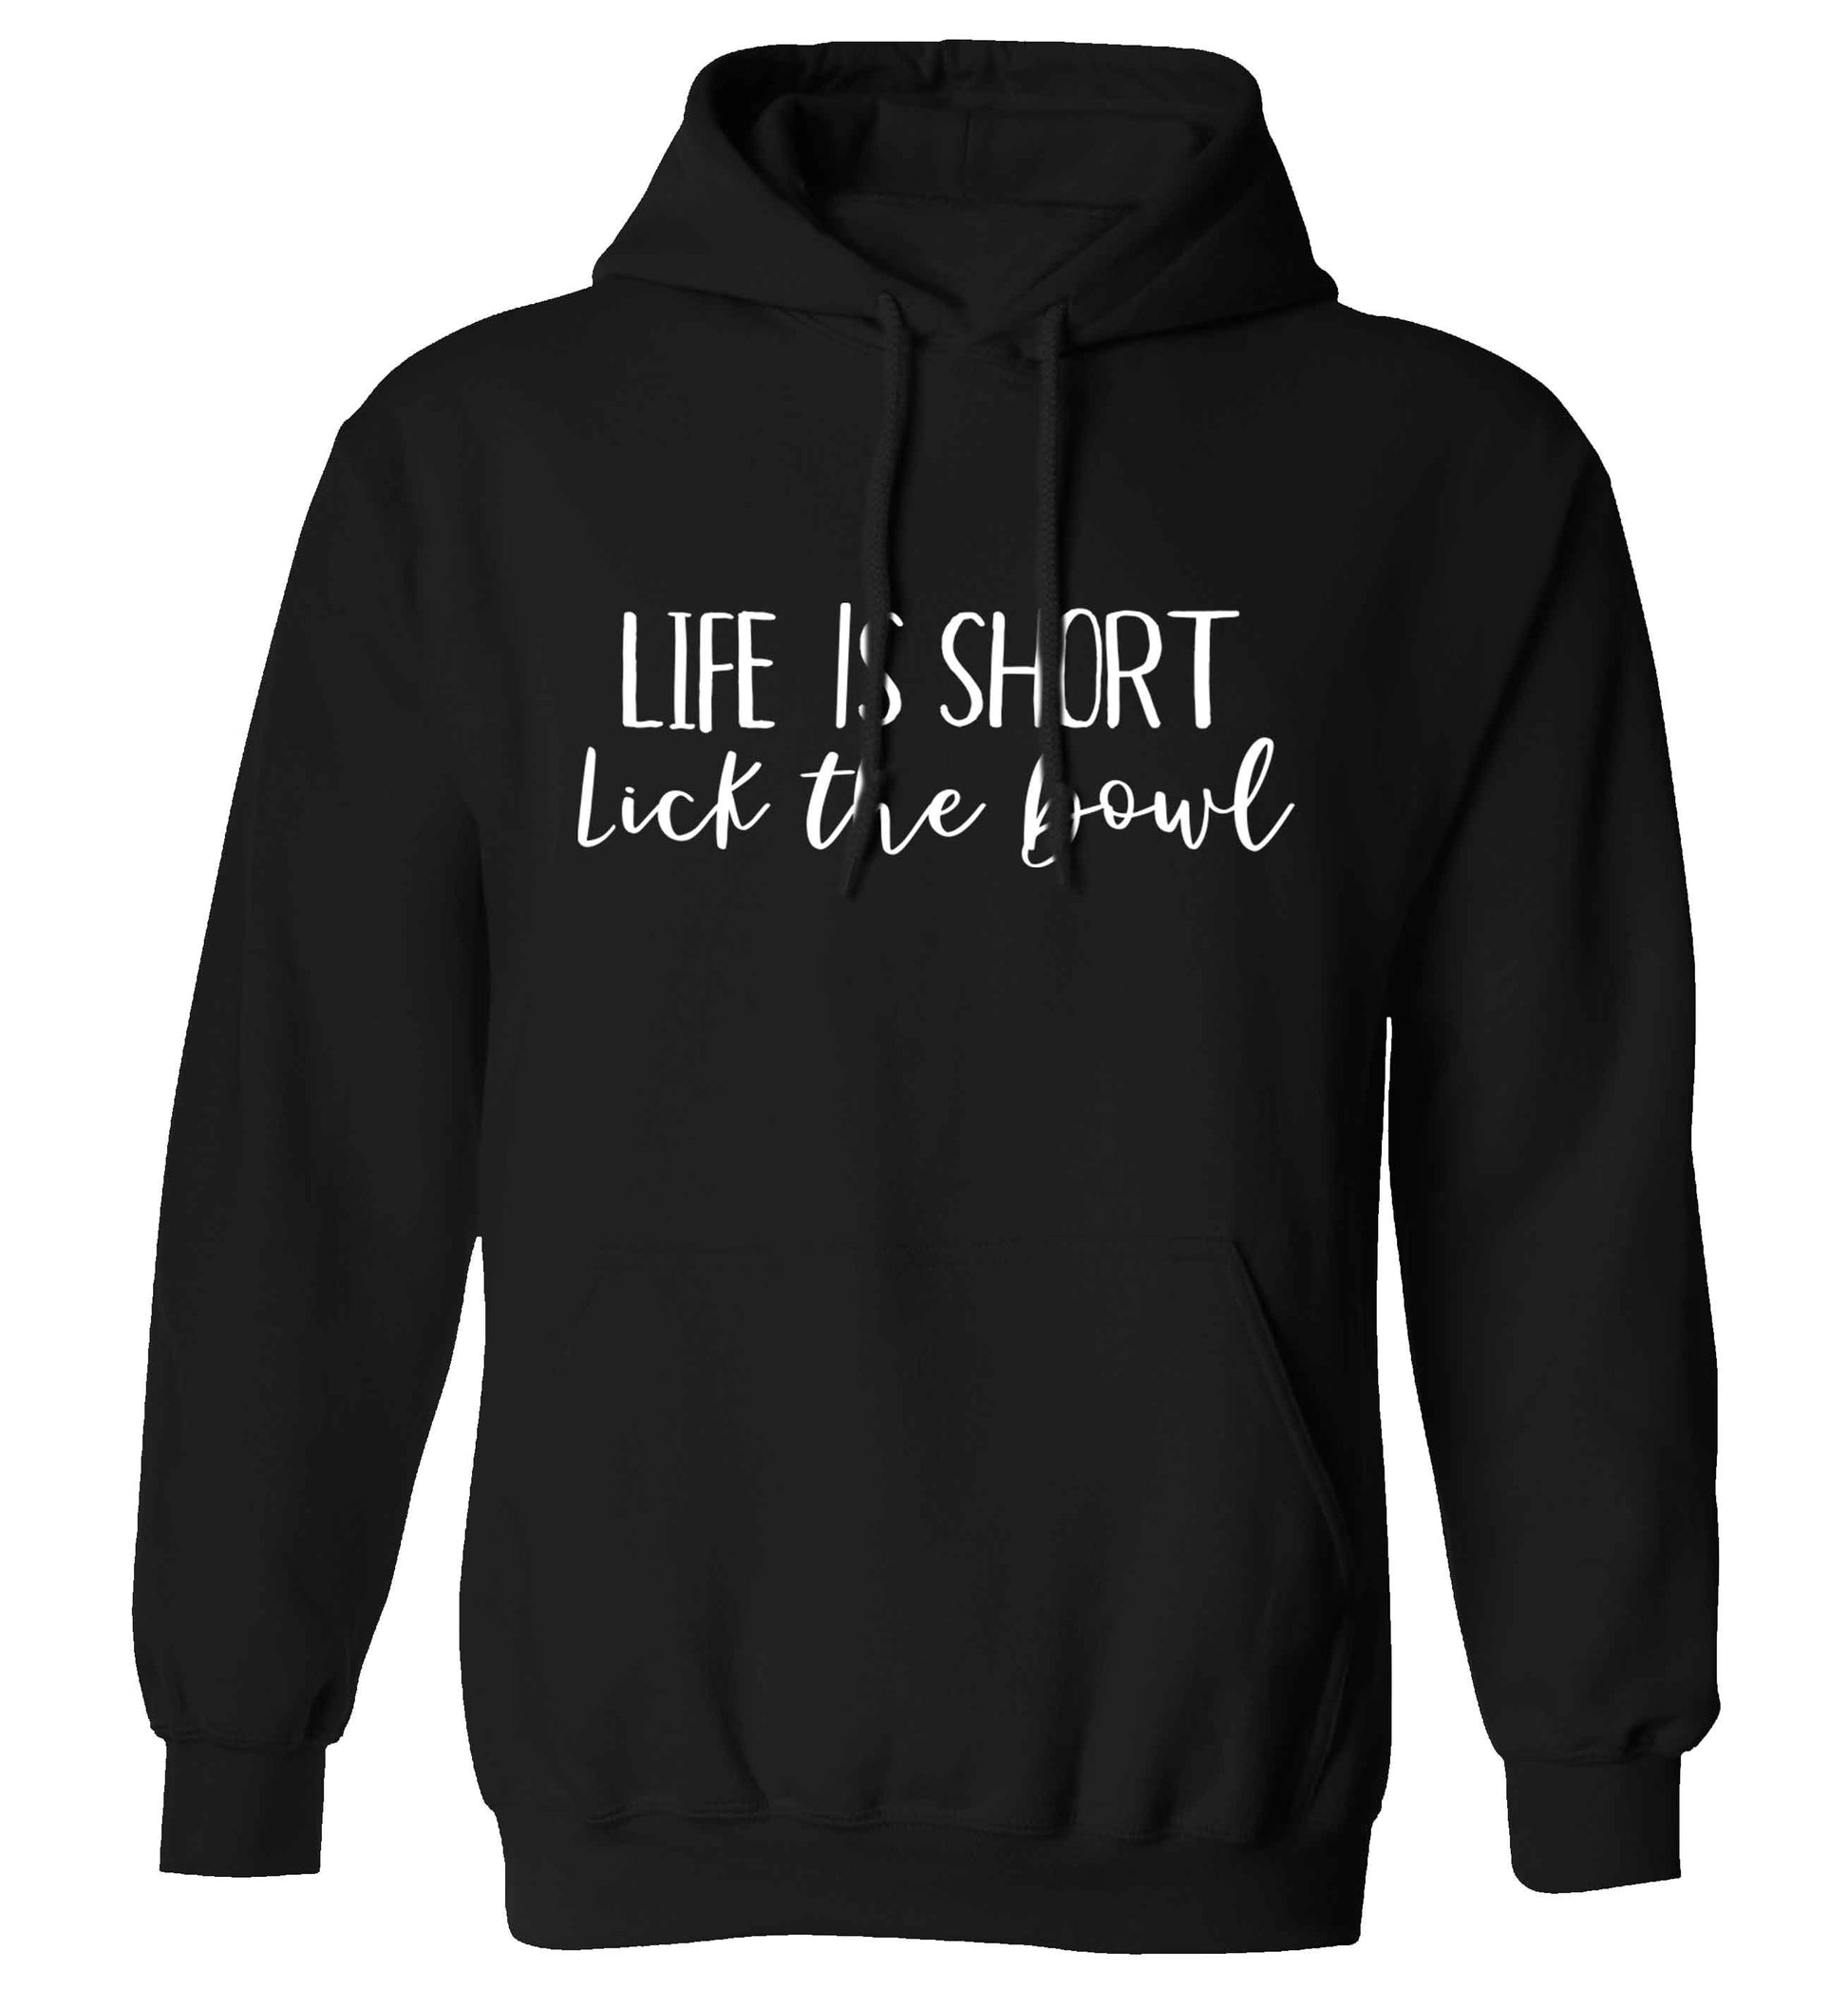 Life is short lick the bowl adults unisex black hoodie 2XL